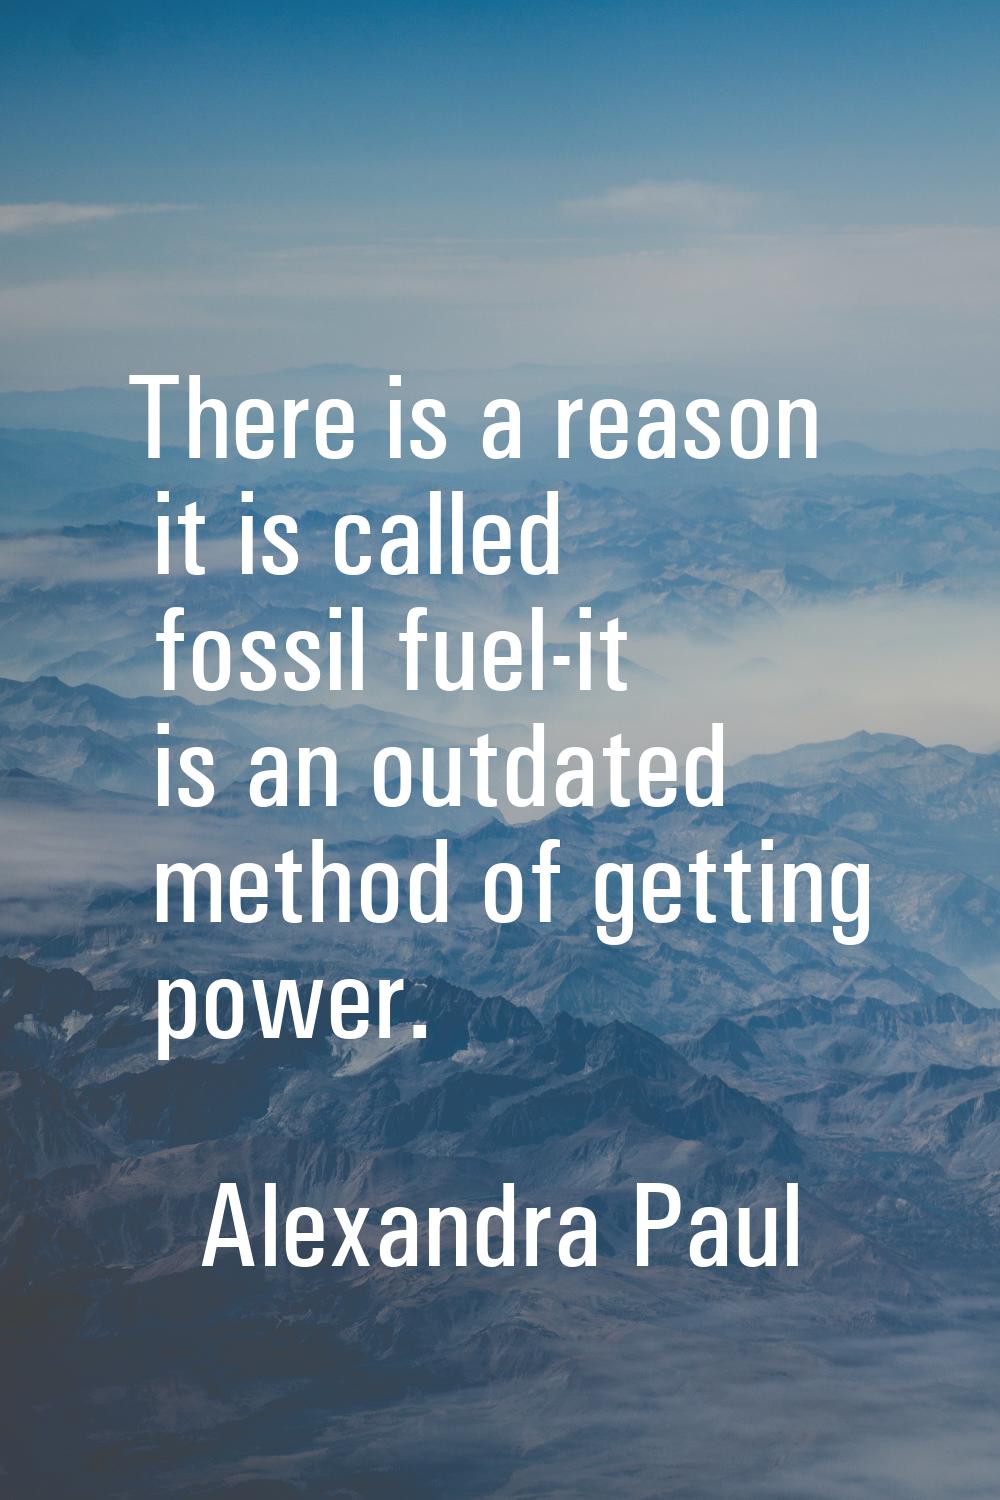 There is a reason it is called fossil fuel-it is an outdated method of getting power.